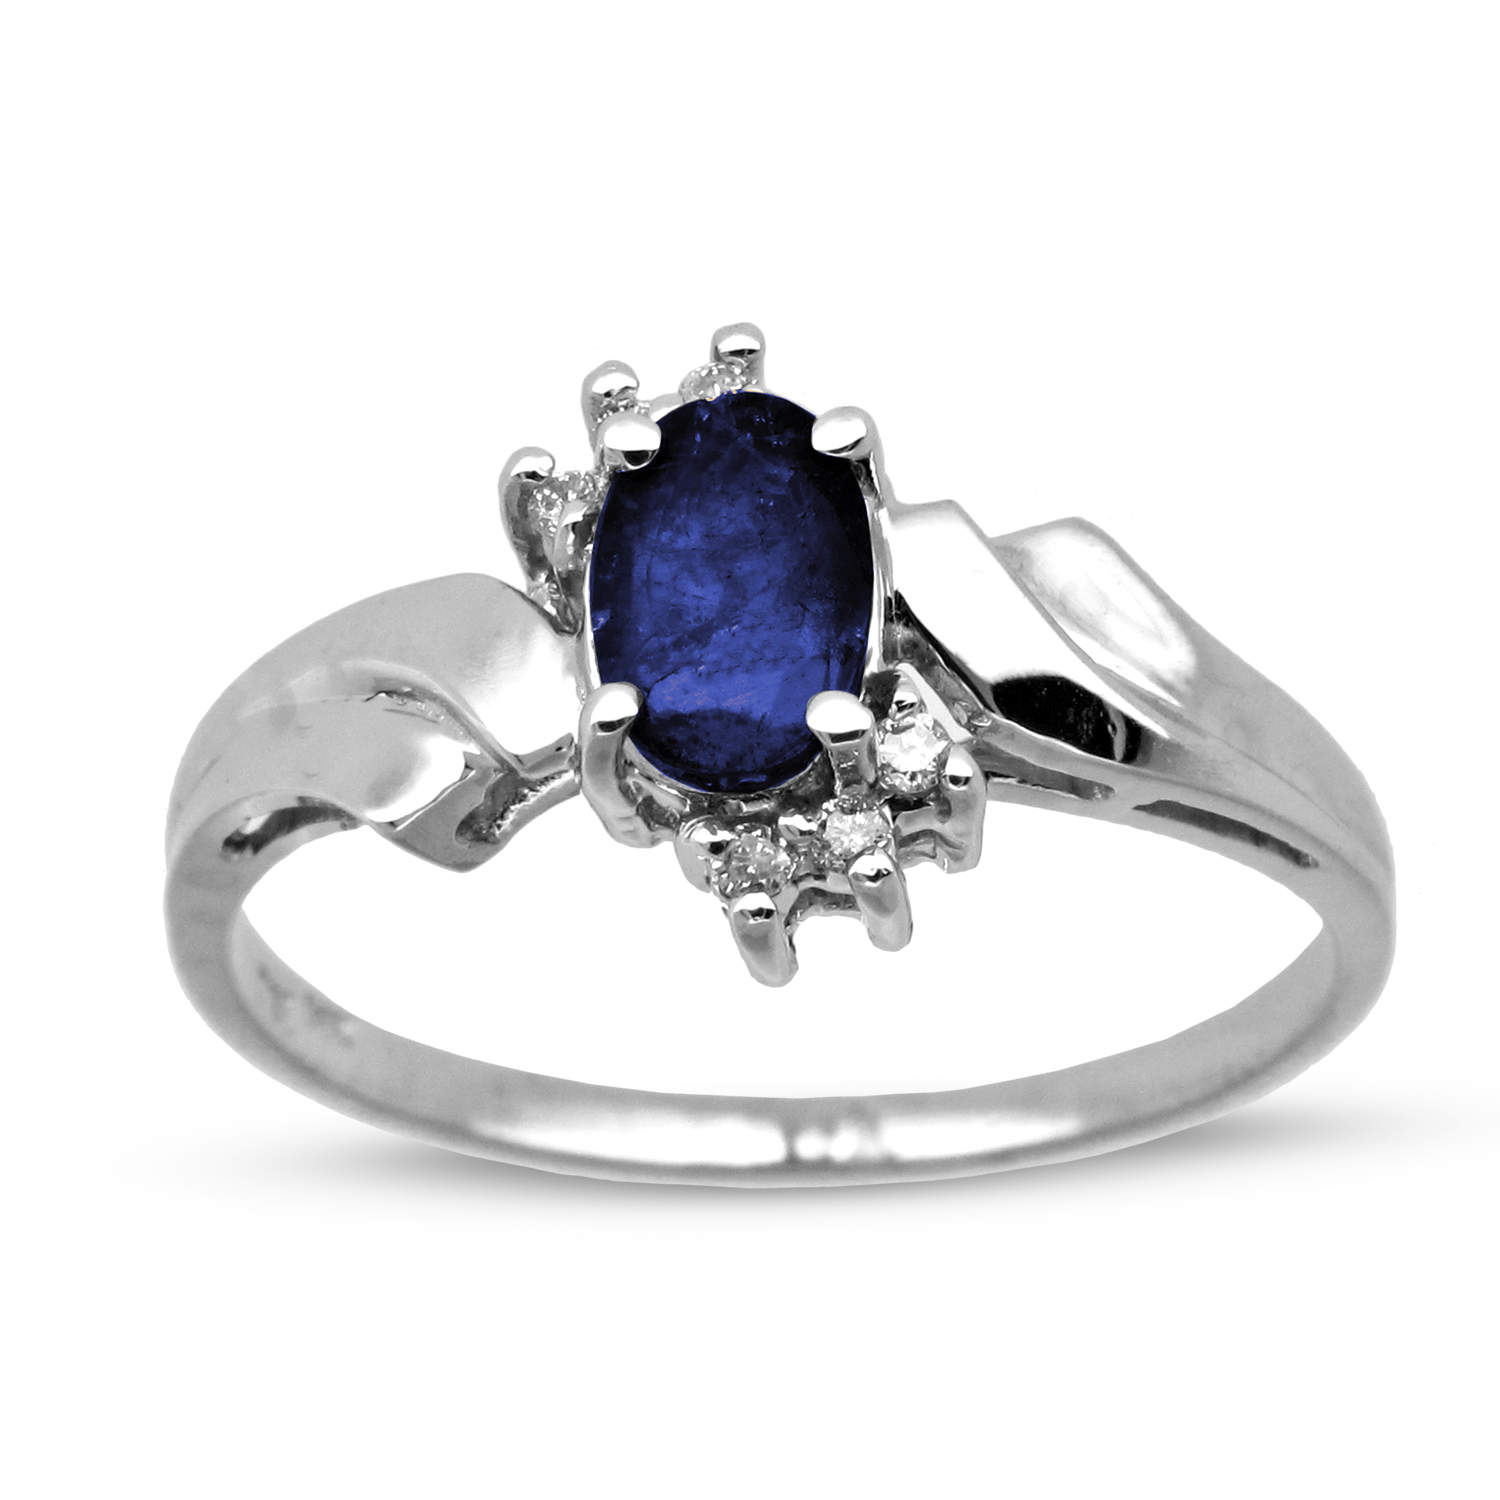 0.60cttw Sapphire and Diamond Fashion Ring set in 14k Gold